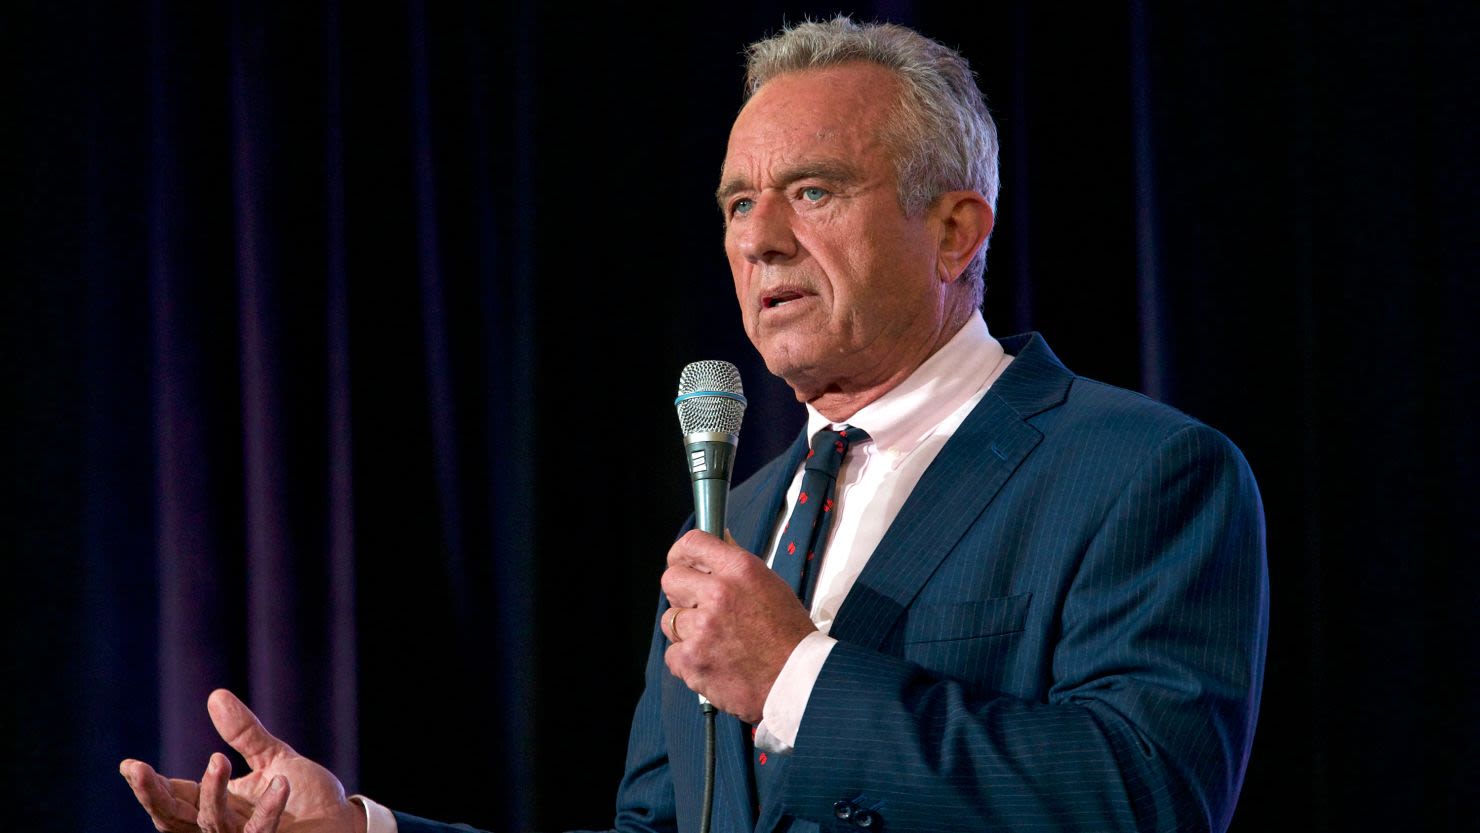 RFK Jr. will be considered for Libertarian Party’s presidential nomination. Trump didn’t file paperwork to qualify | CNN Politics